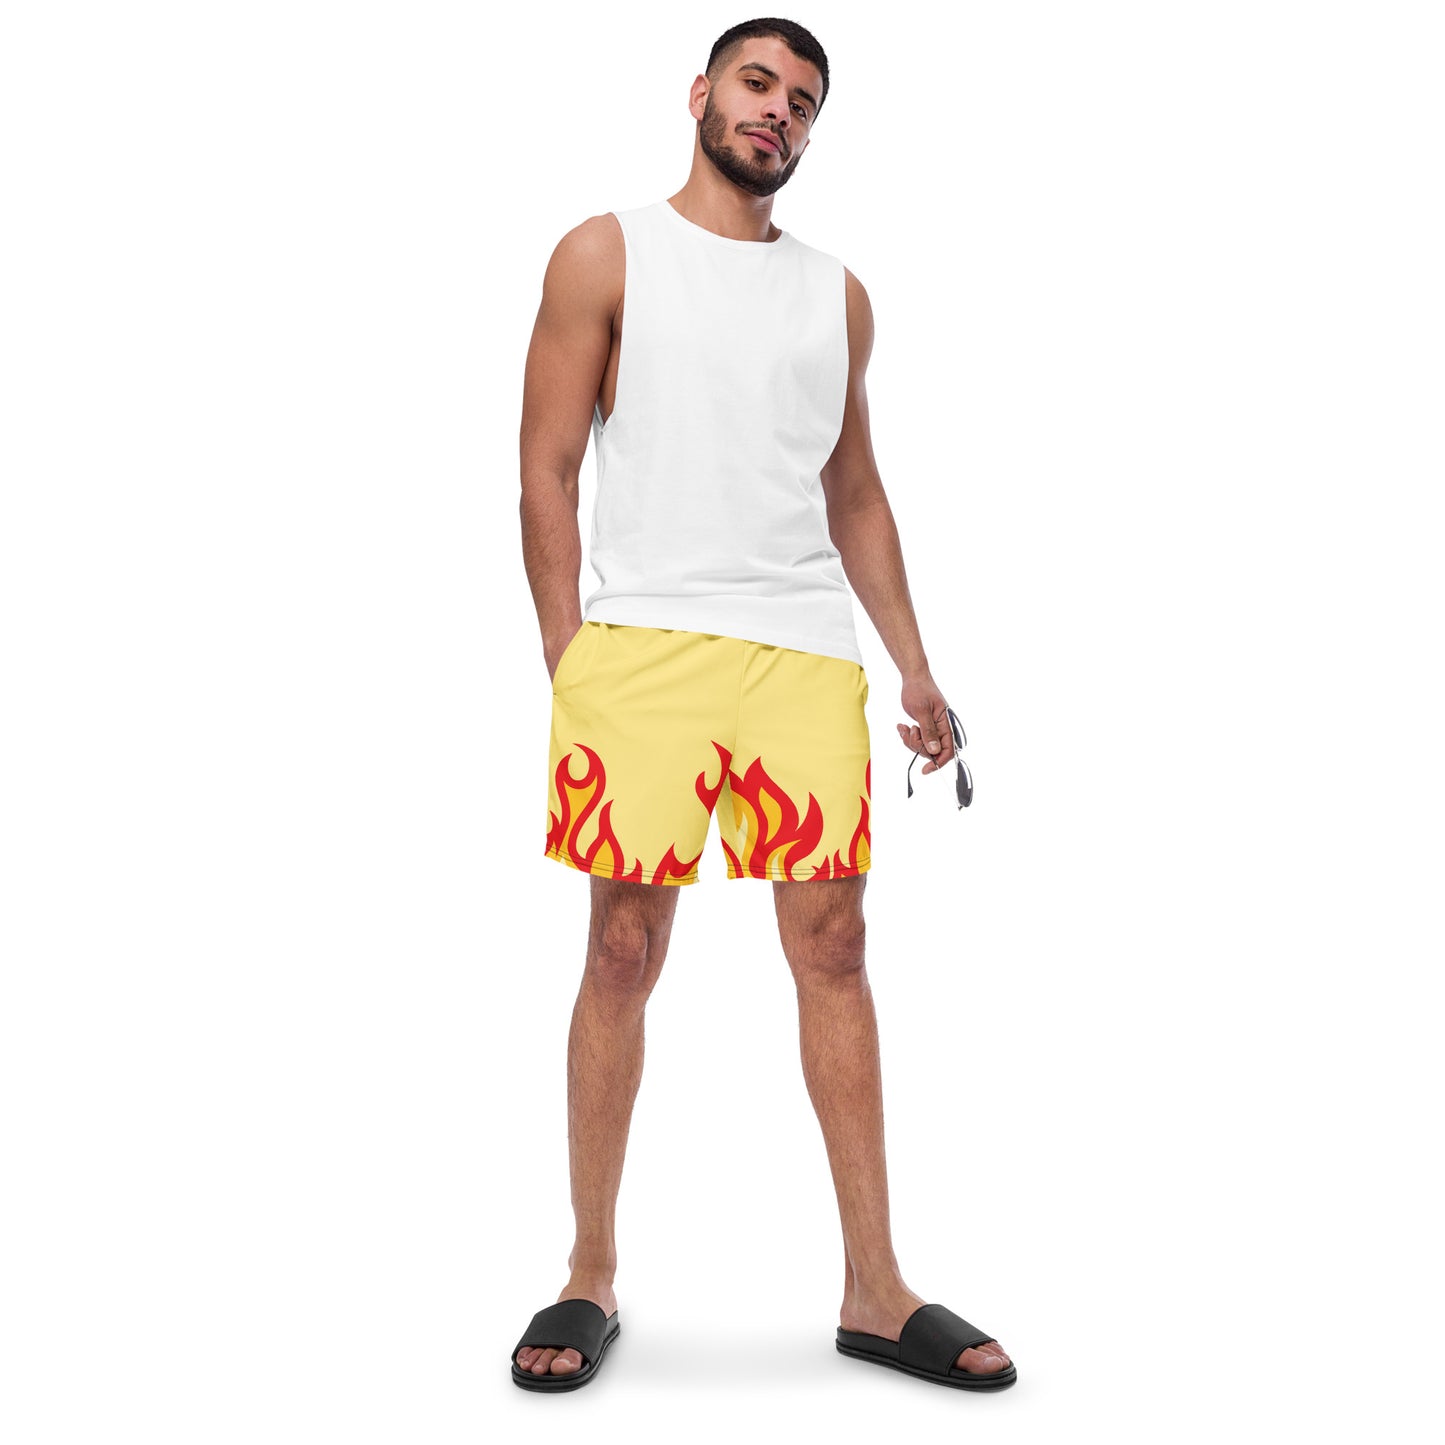 Men with yellow swim trunk with print of red flames